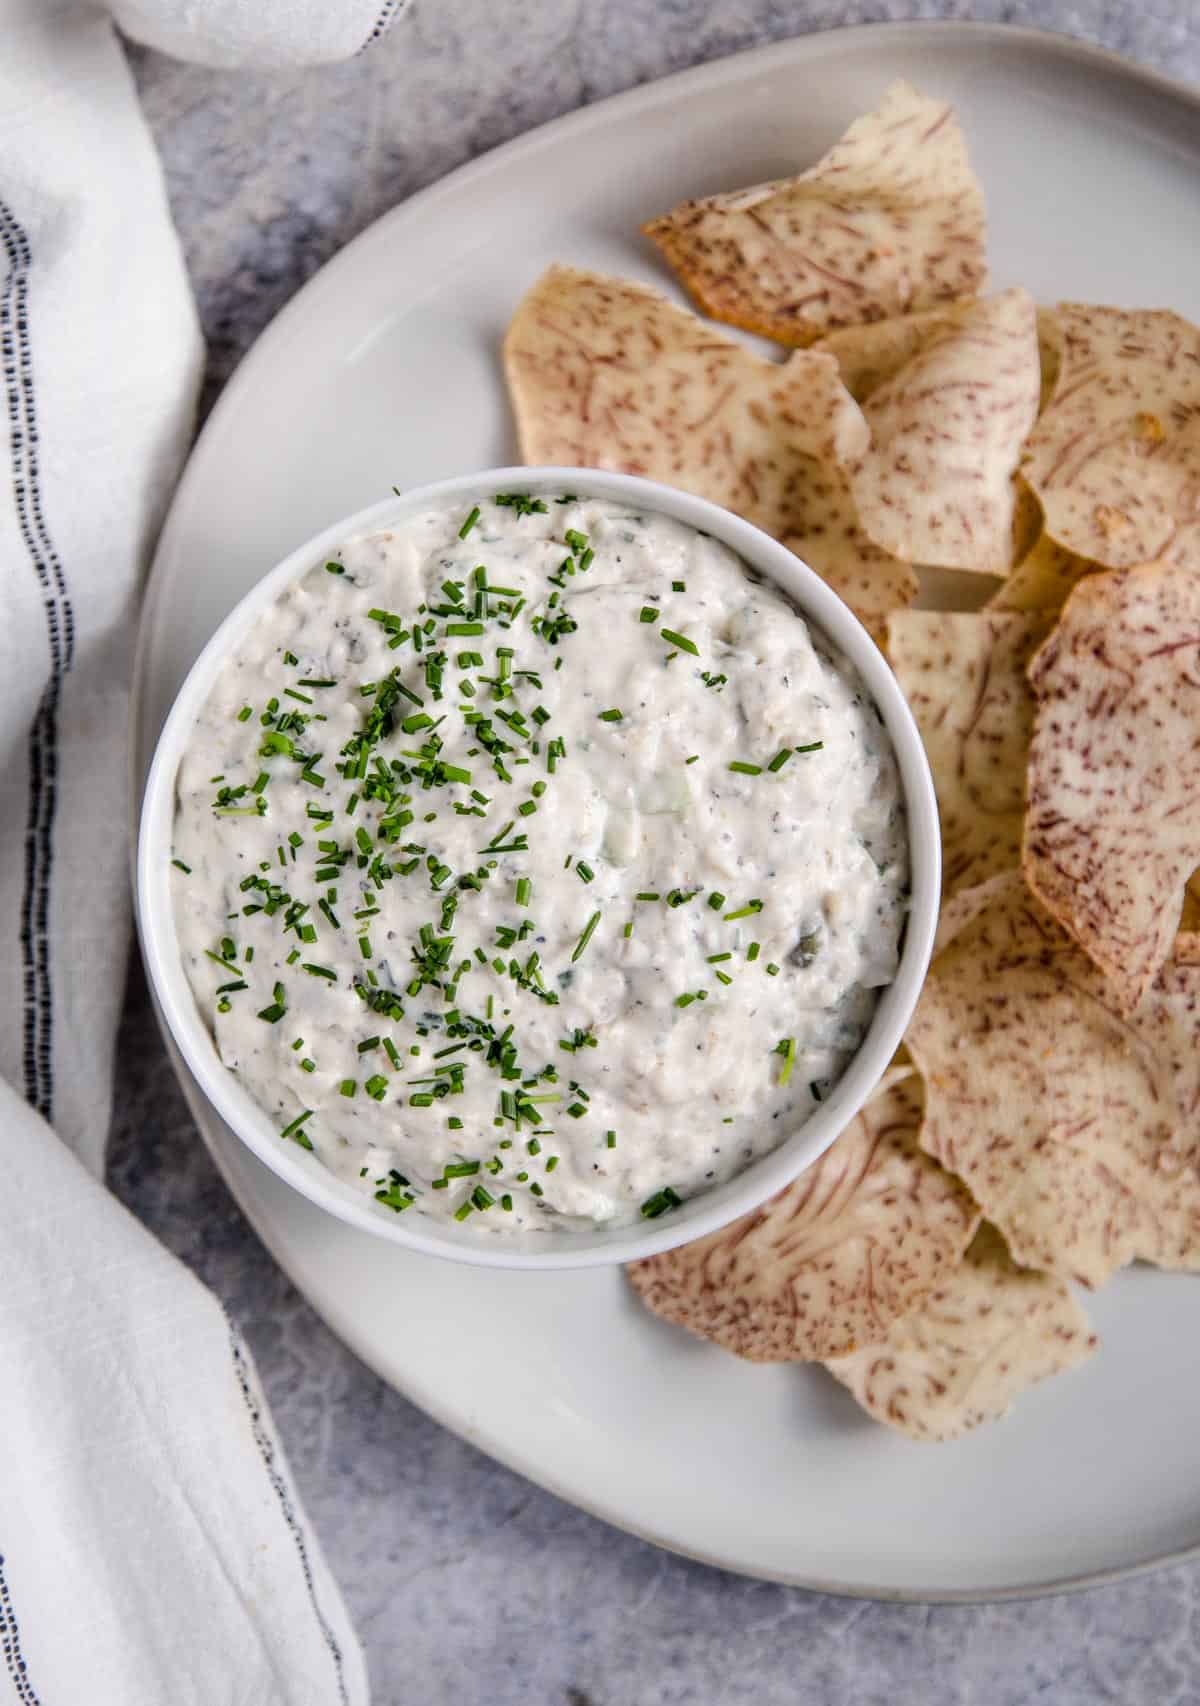 Smoked fish dip in a bowl with taro chips